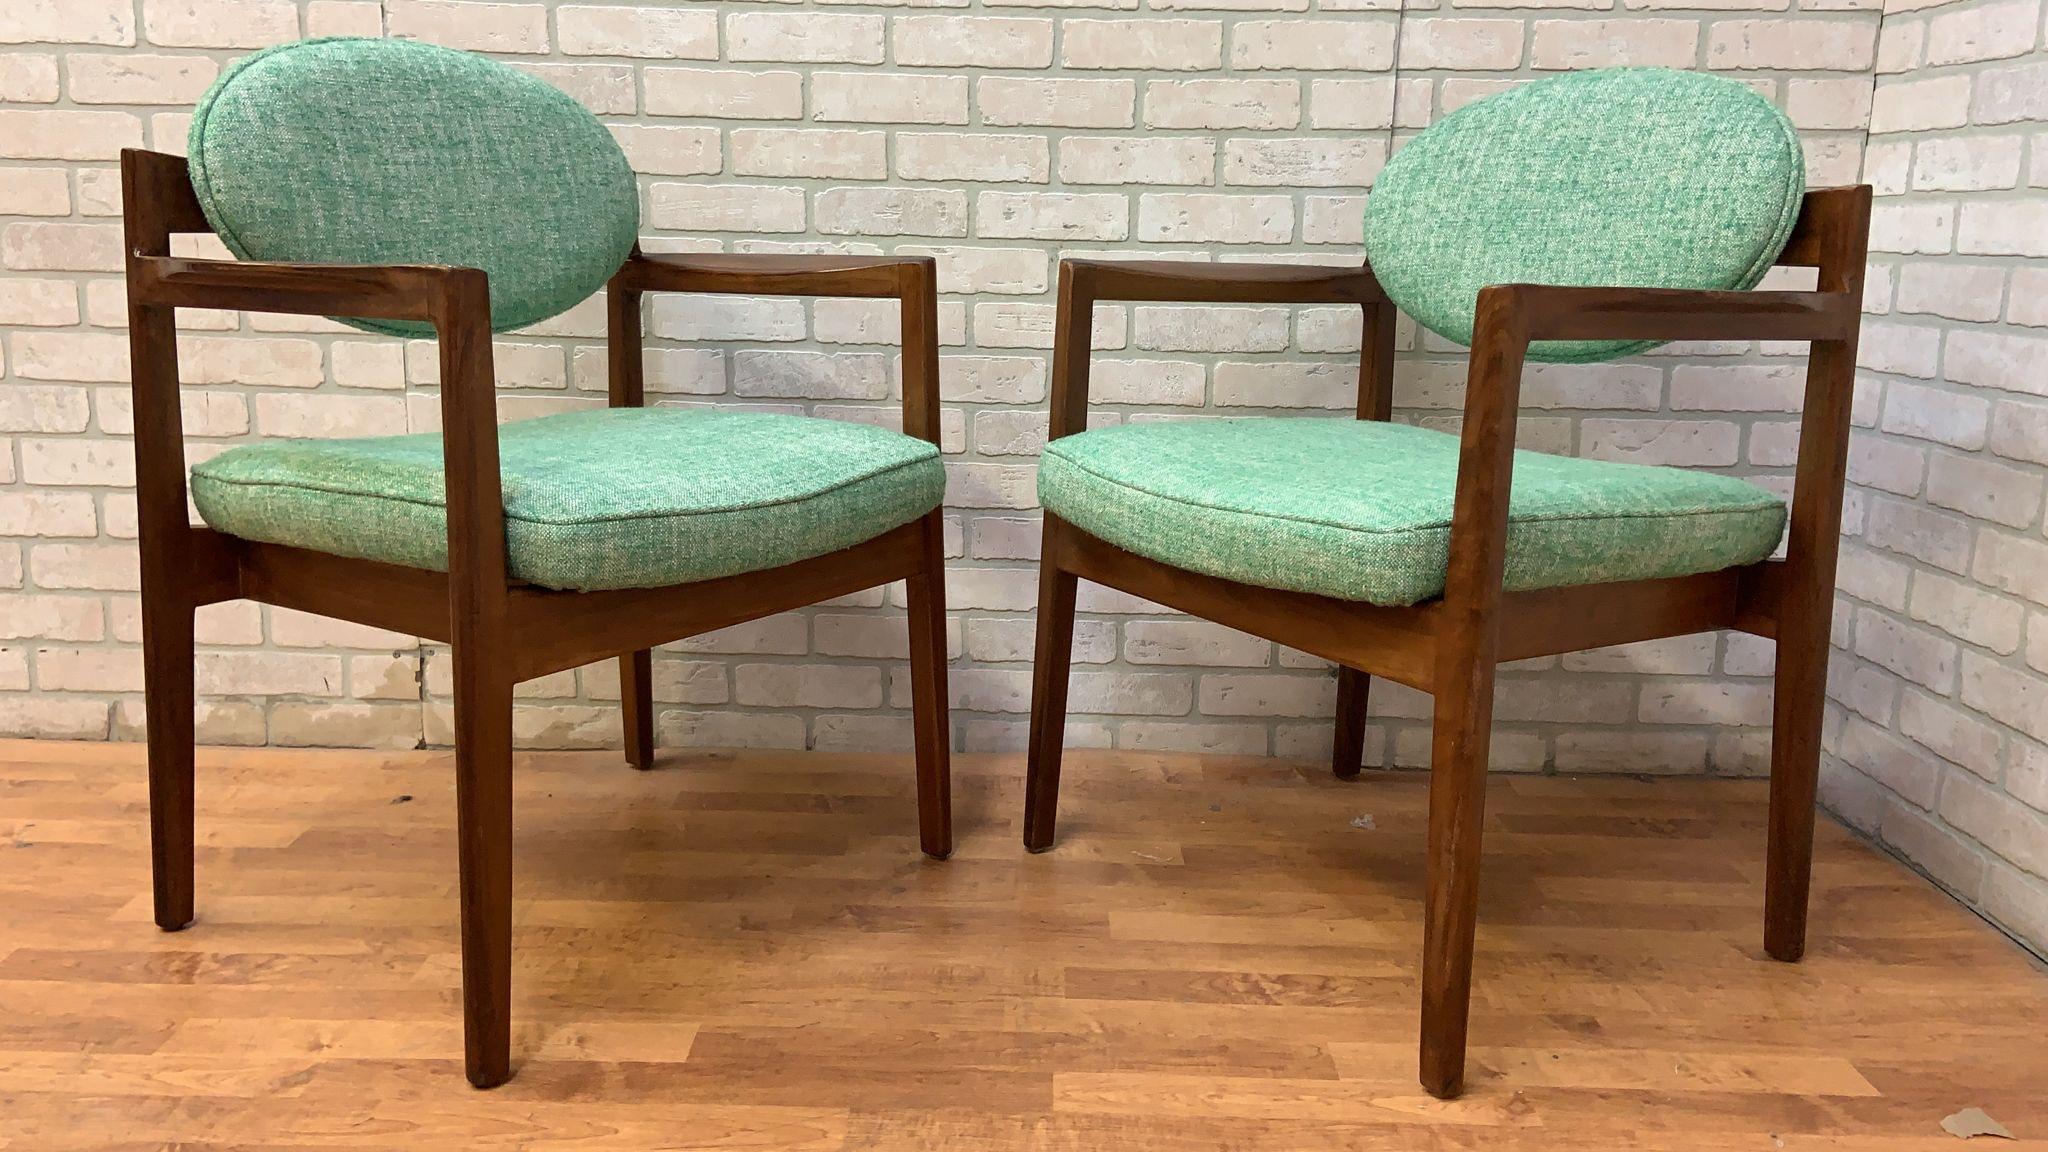 Mid Century Modern Armchairs 'Oval-Back' by Jens Risom - Pair

The Mid Century Modern Armchairs, known as ‘Oval-Back,’ designed by Jens Risom and offered as a pair, are a stunning example of mid-century design from the 1960s. These chairs have been